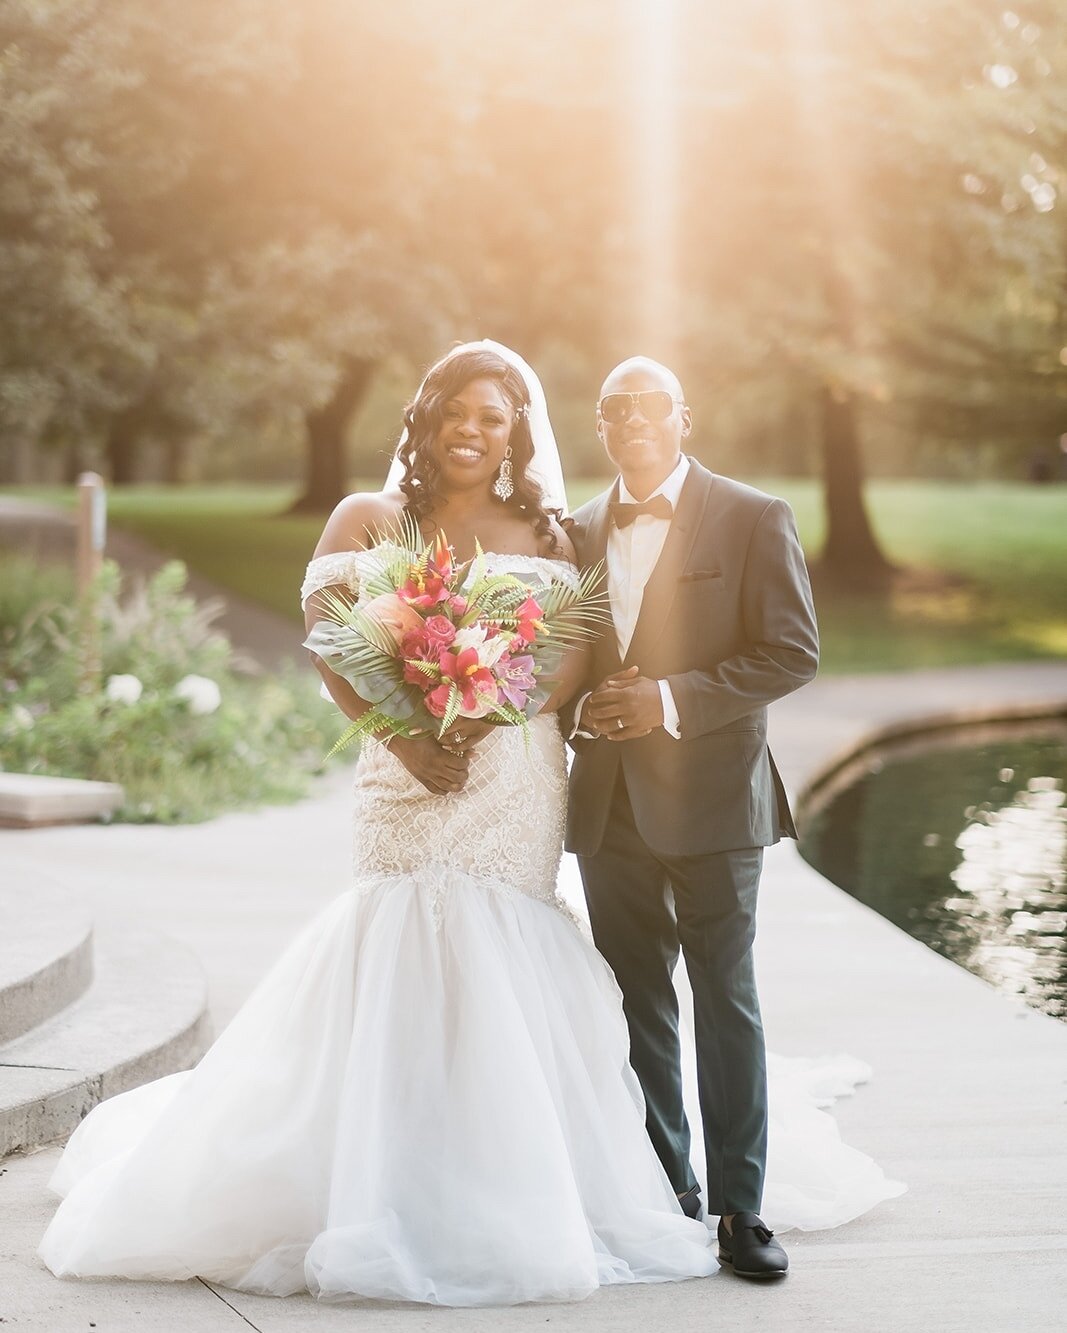 Golden hour is pure magic for wedding photos! That warm, soft light just before sunset creates stunning, romantic images. 

Want to capture your love in this enchanting glow? Let&rsquo;s plan for it! I will help you along with your wedding planner cr